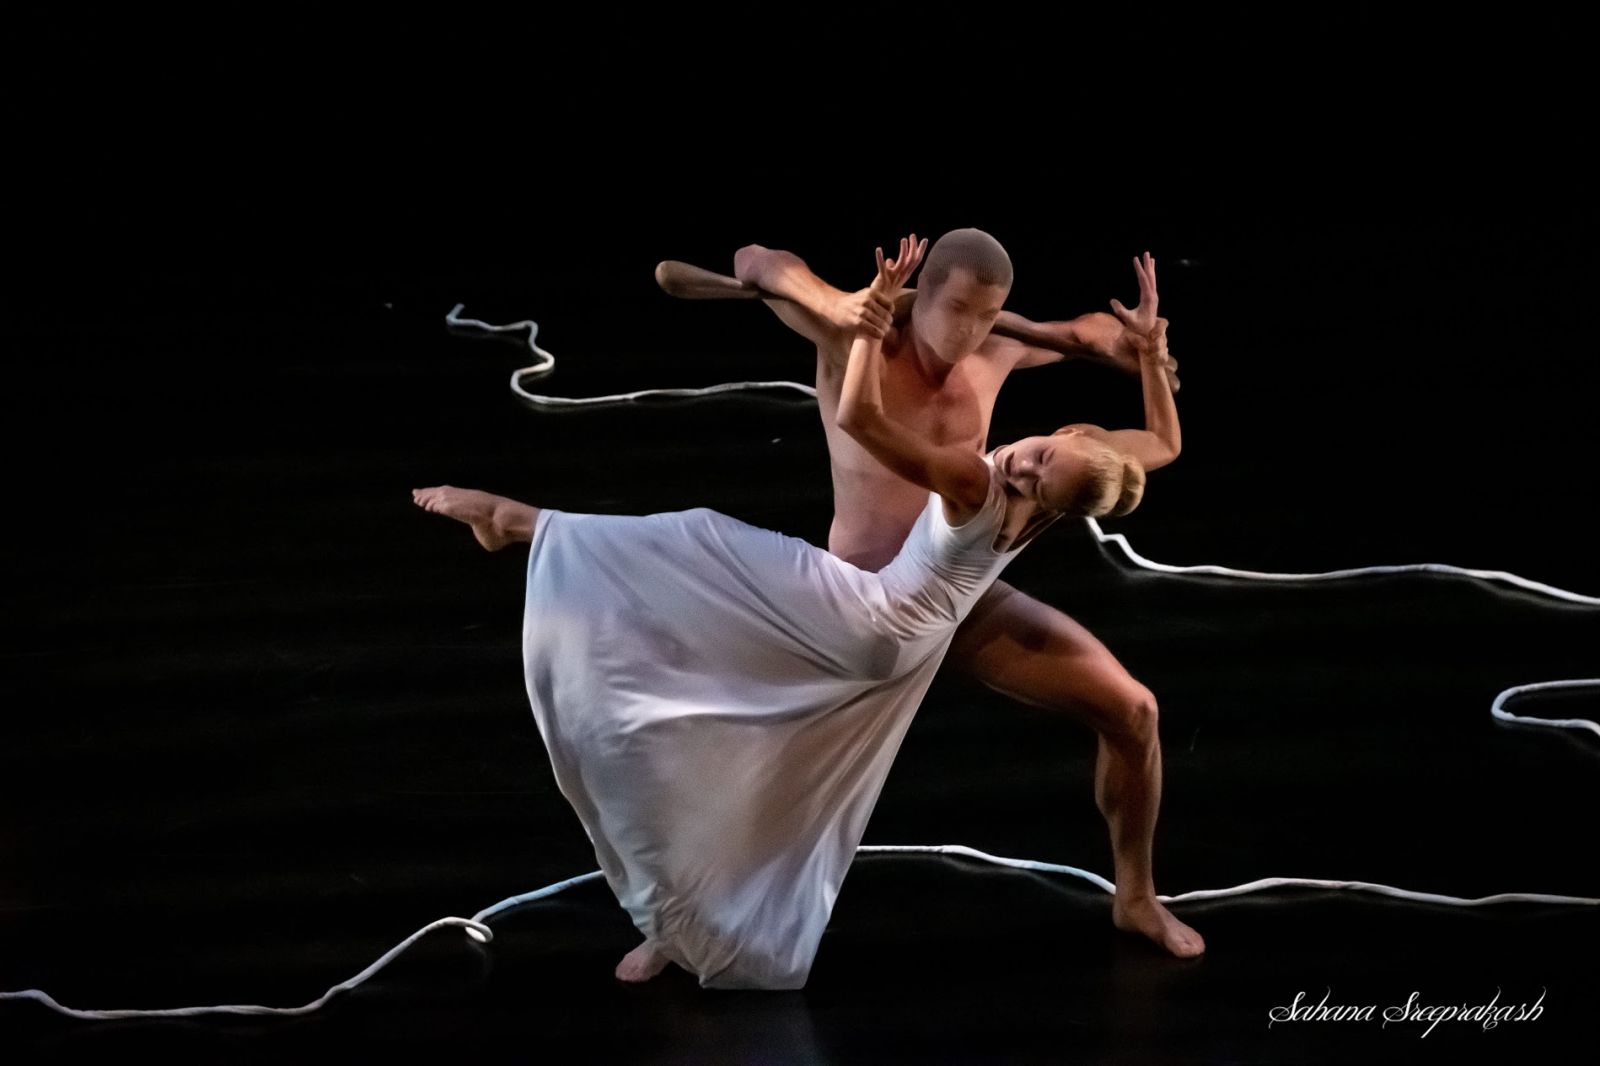 A nude man and a woman in a white dress engaged in modern dance against a black background. A white string wraps around behind them.